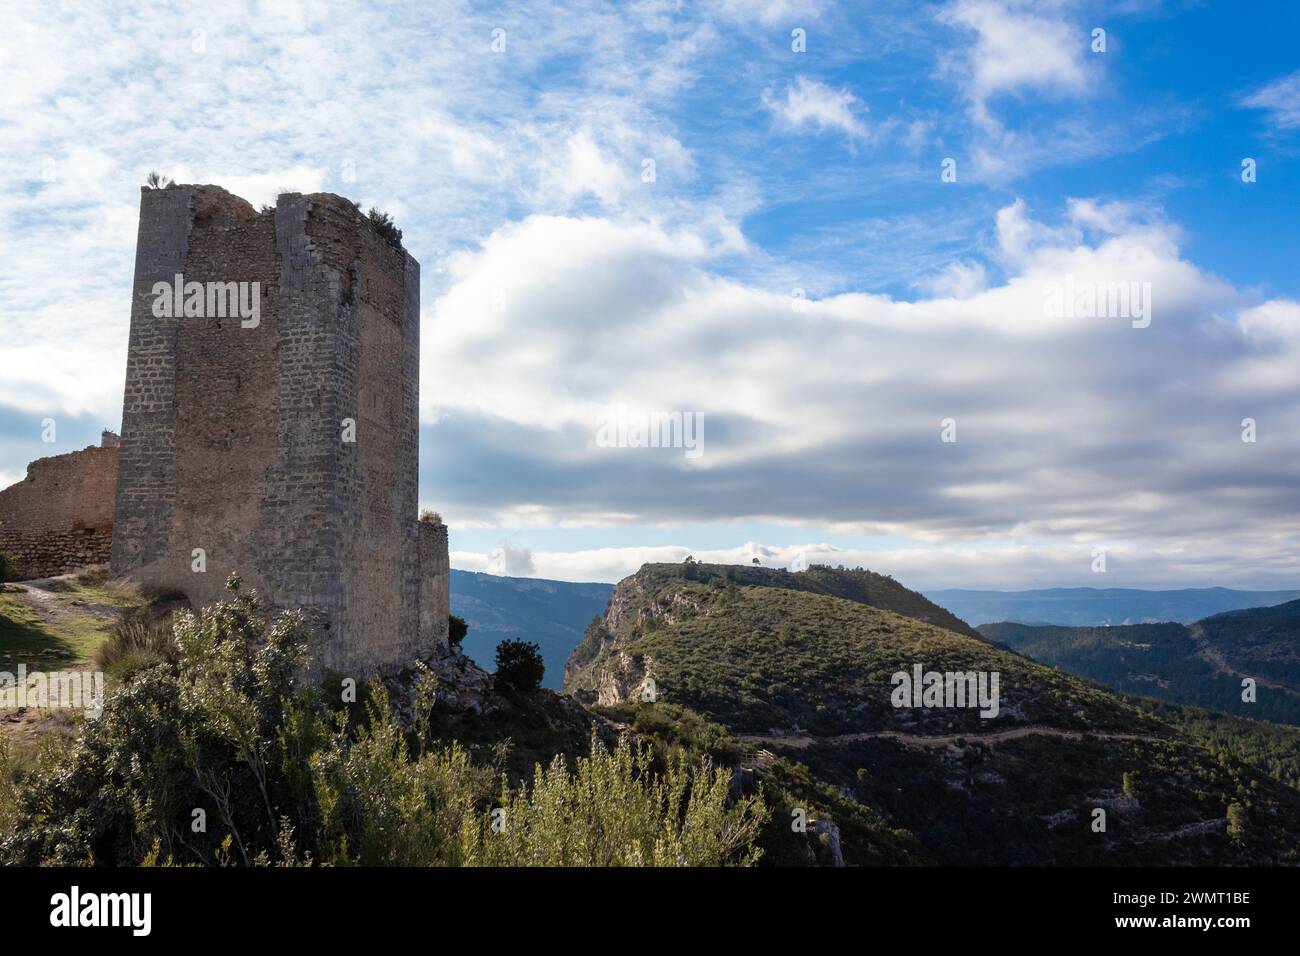 Old tower of the medieval castle of Chirel. Cortes de Pallás - Valencian Community - Spain Stock Photo